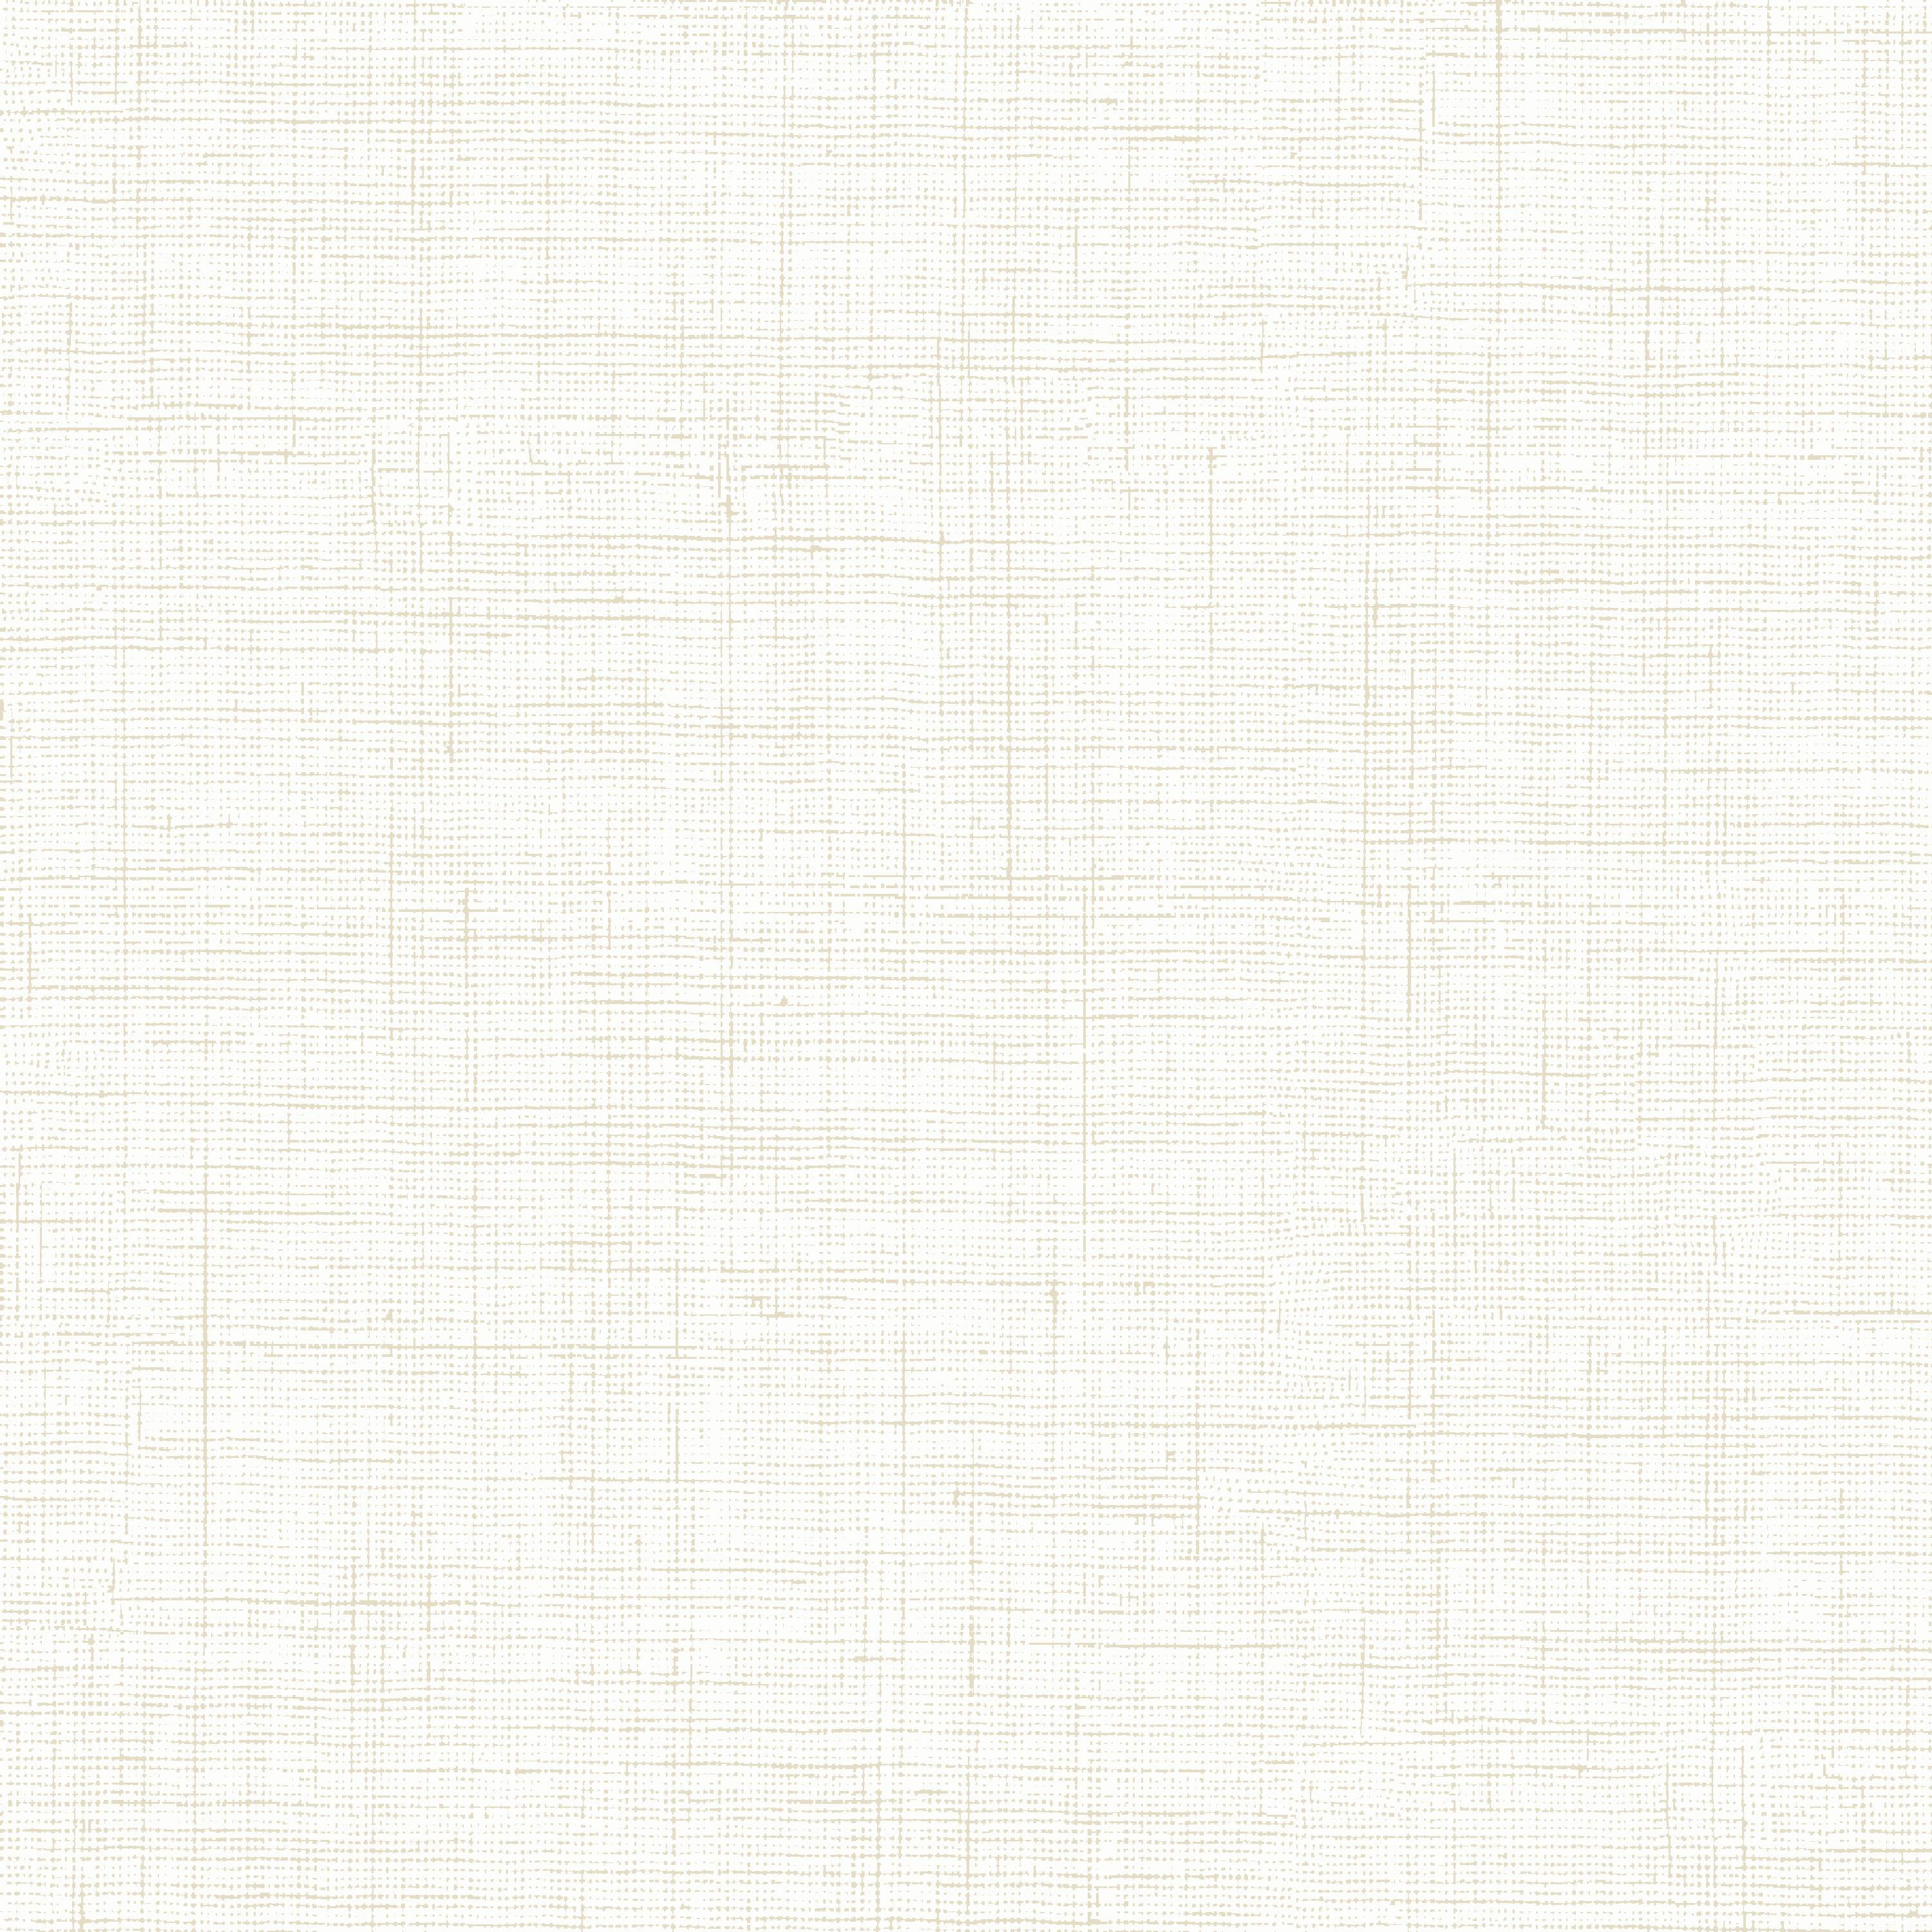 Waverly Inspirations 100% Cotton Duck 54 inch Texture Cream Color Sewing Fabric by The Yard